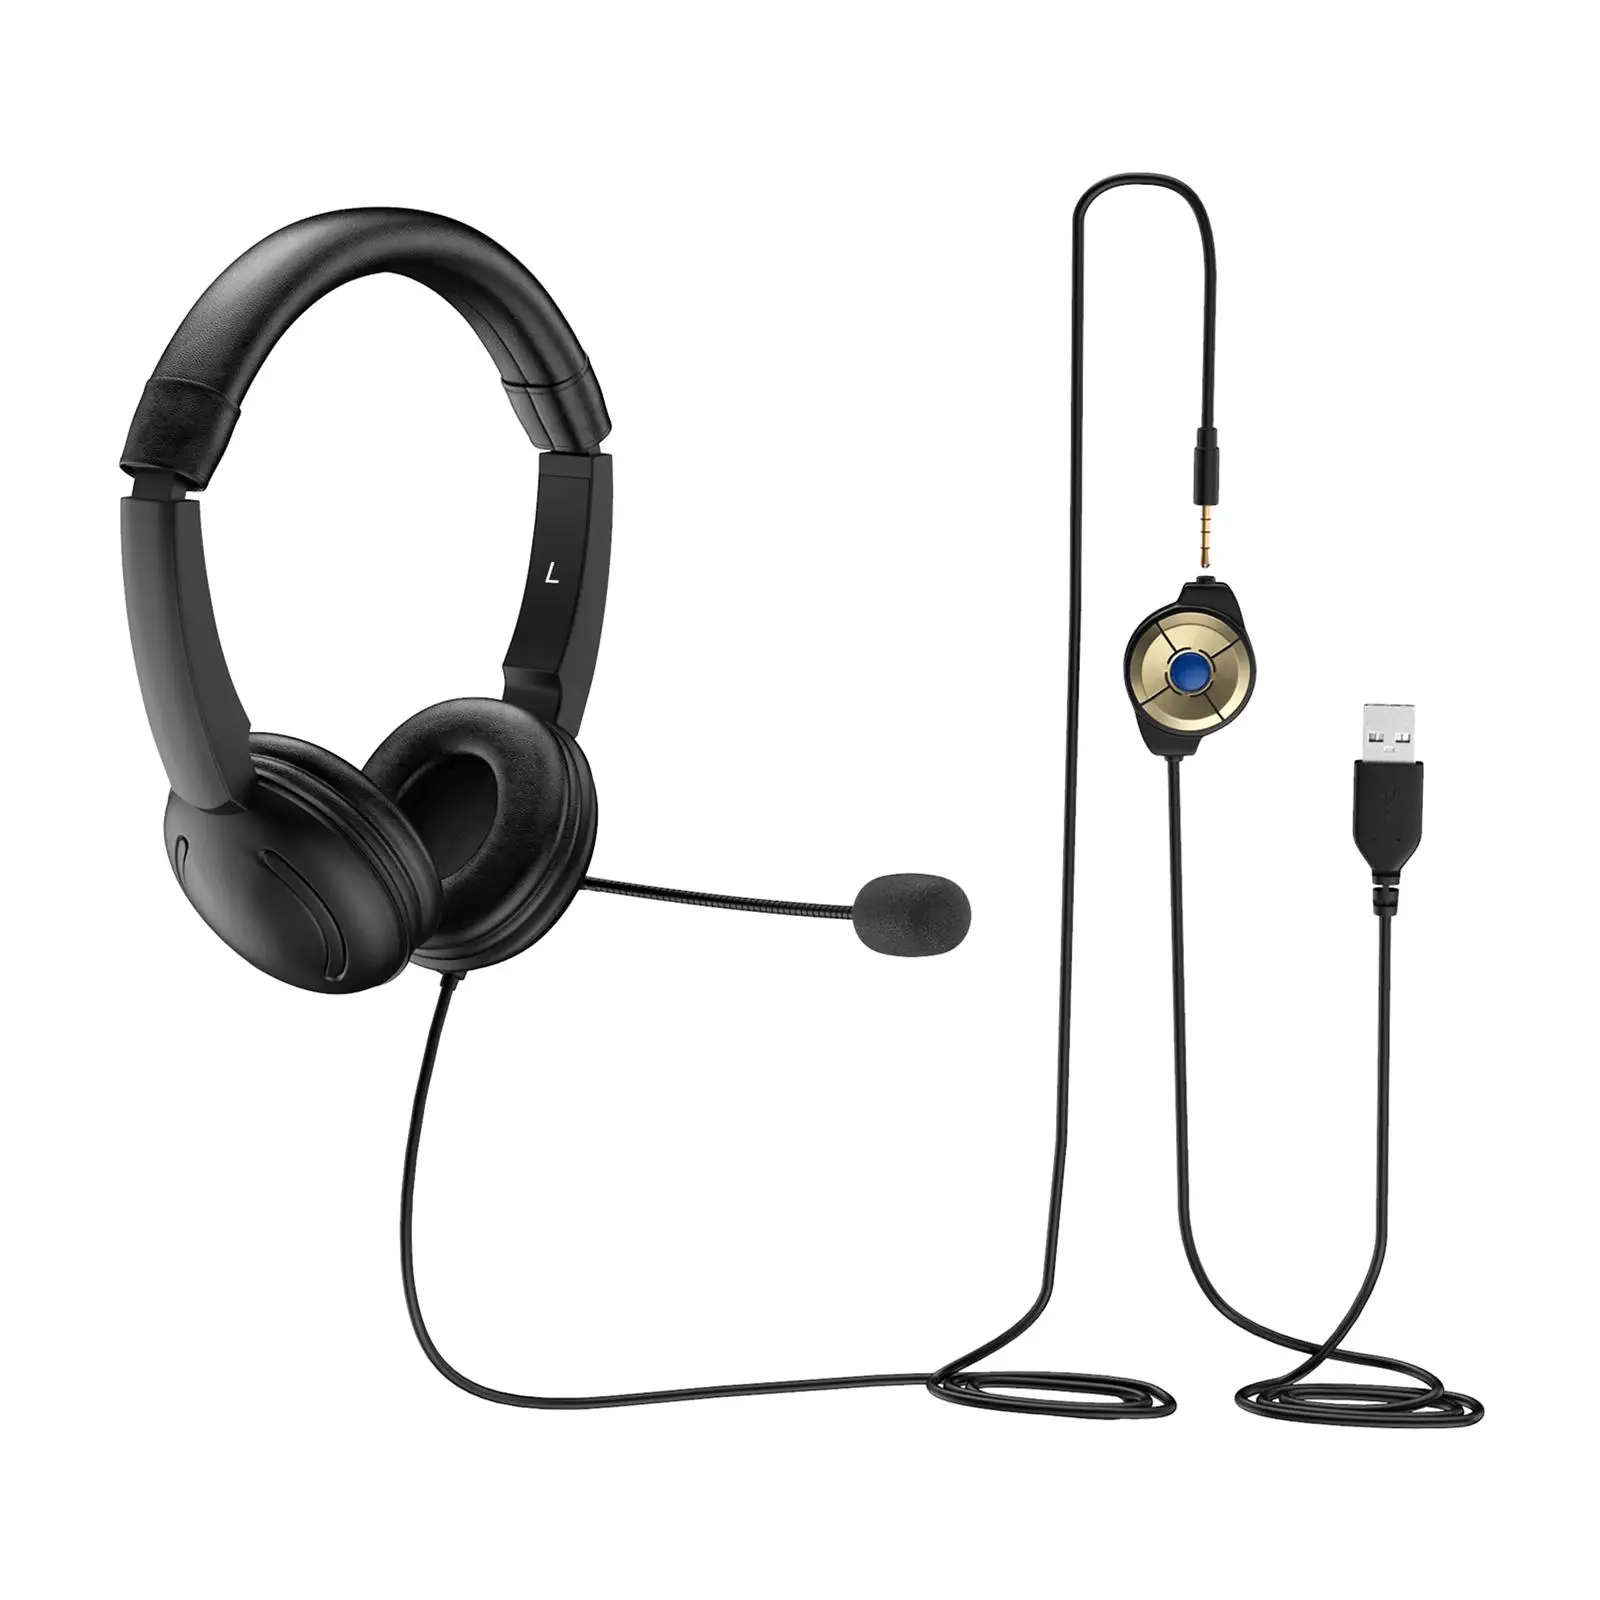 USB Wired Headset Soft Lightweight Computer Headset Computer Laptop Headphones for Laptop Video Meetings Home Office Call Center